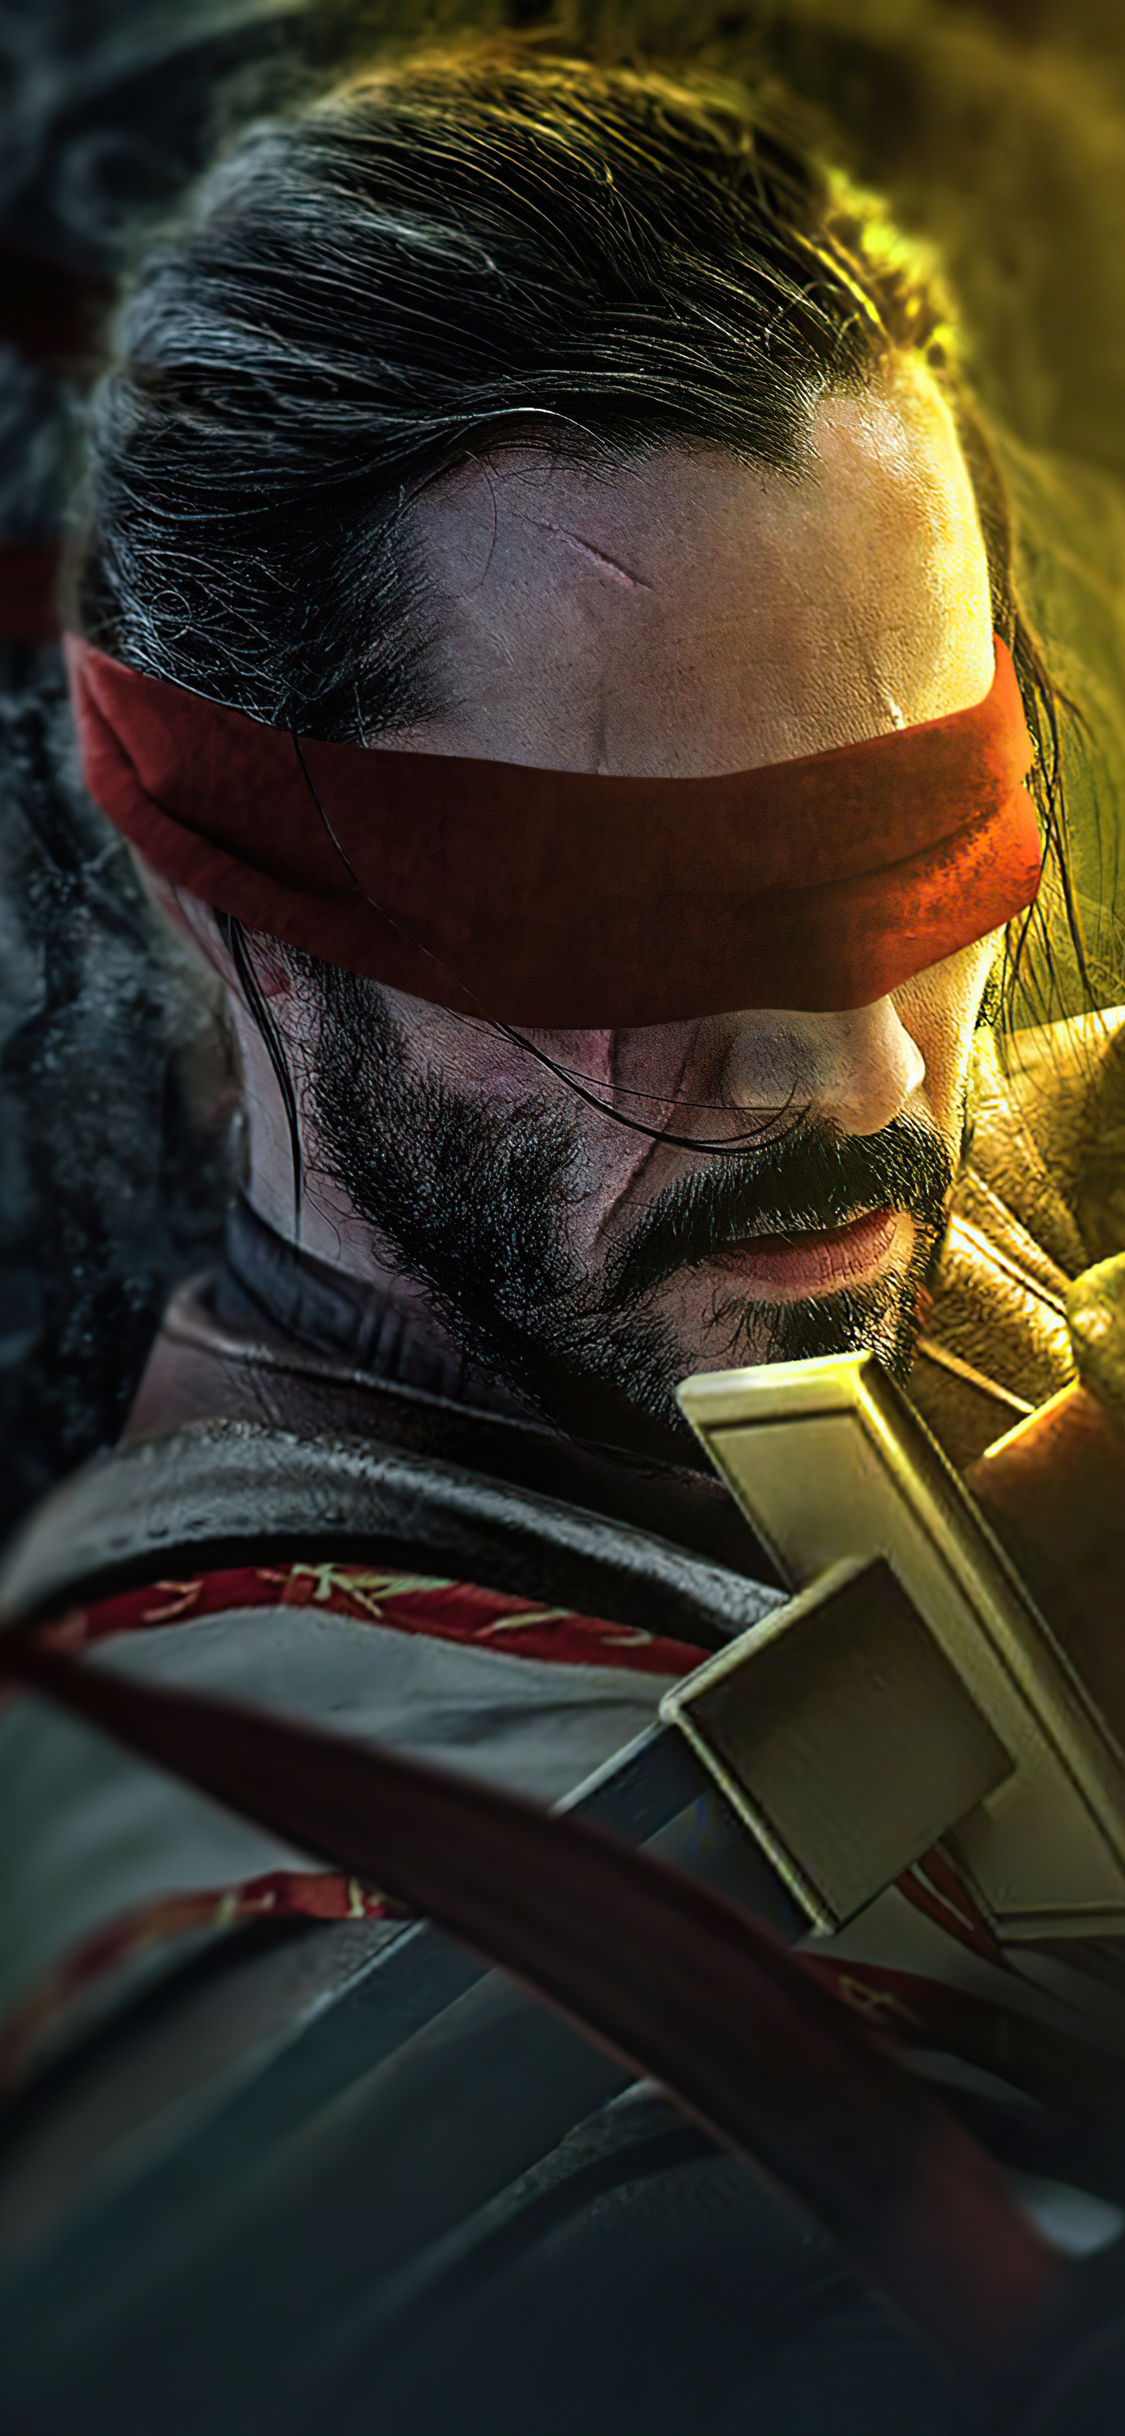 Download wallpapers Kenshi Takahashi MKX 4k red neon lights MK10 Mortal  Kombat X creative Mortal Kombat Kenshi Takahashi Mortal Kombat MKX  Kenshi Takahashi for desktop with resolution 3840x2400 High Quality HD  pictures